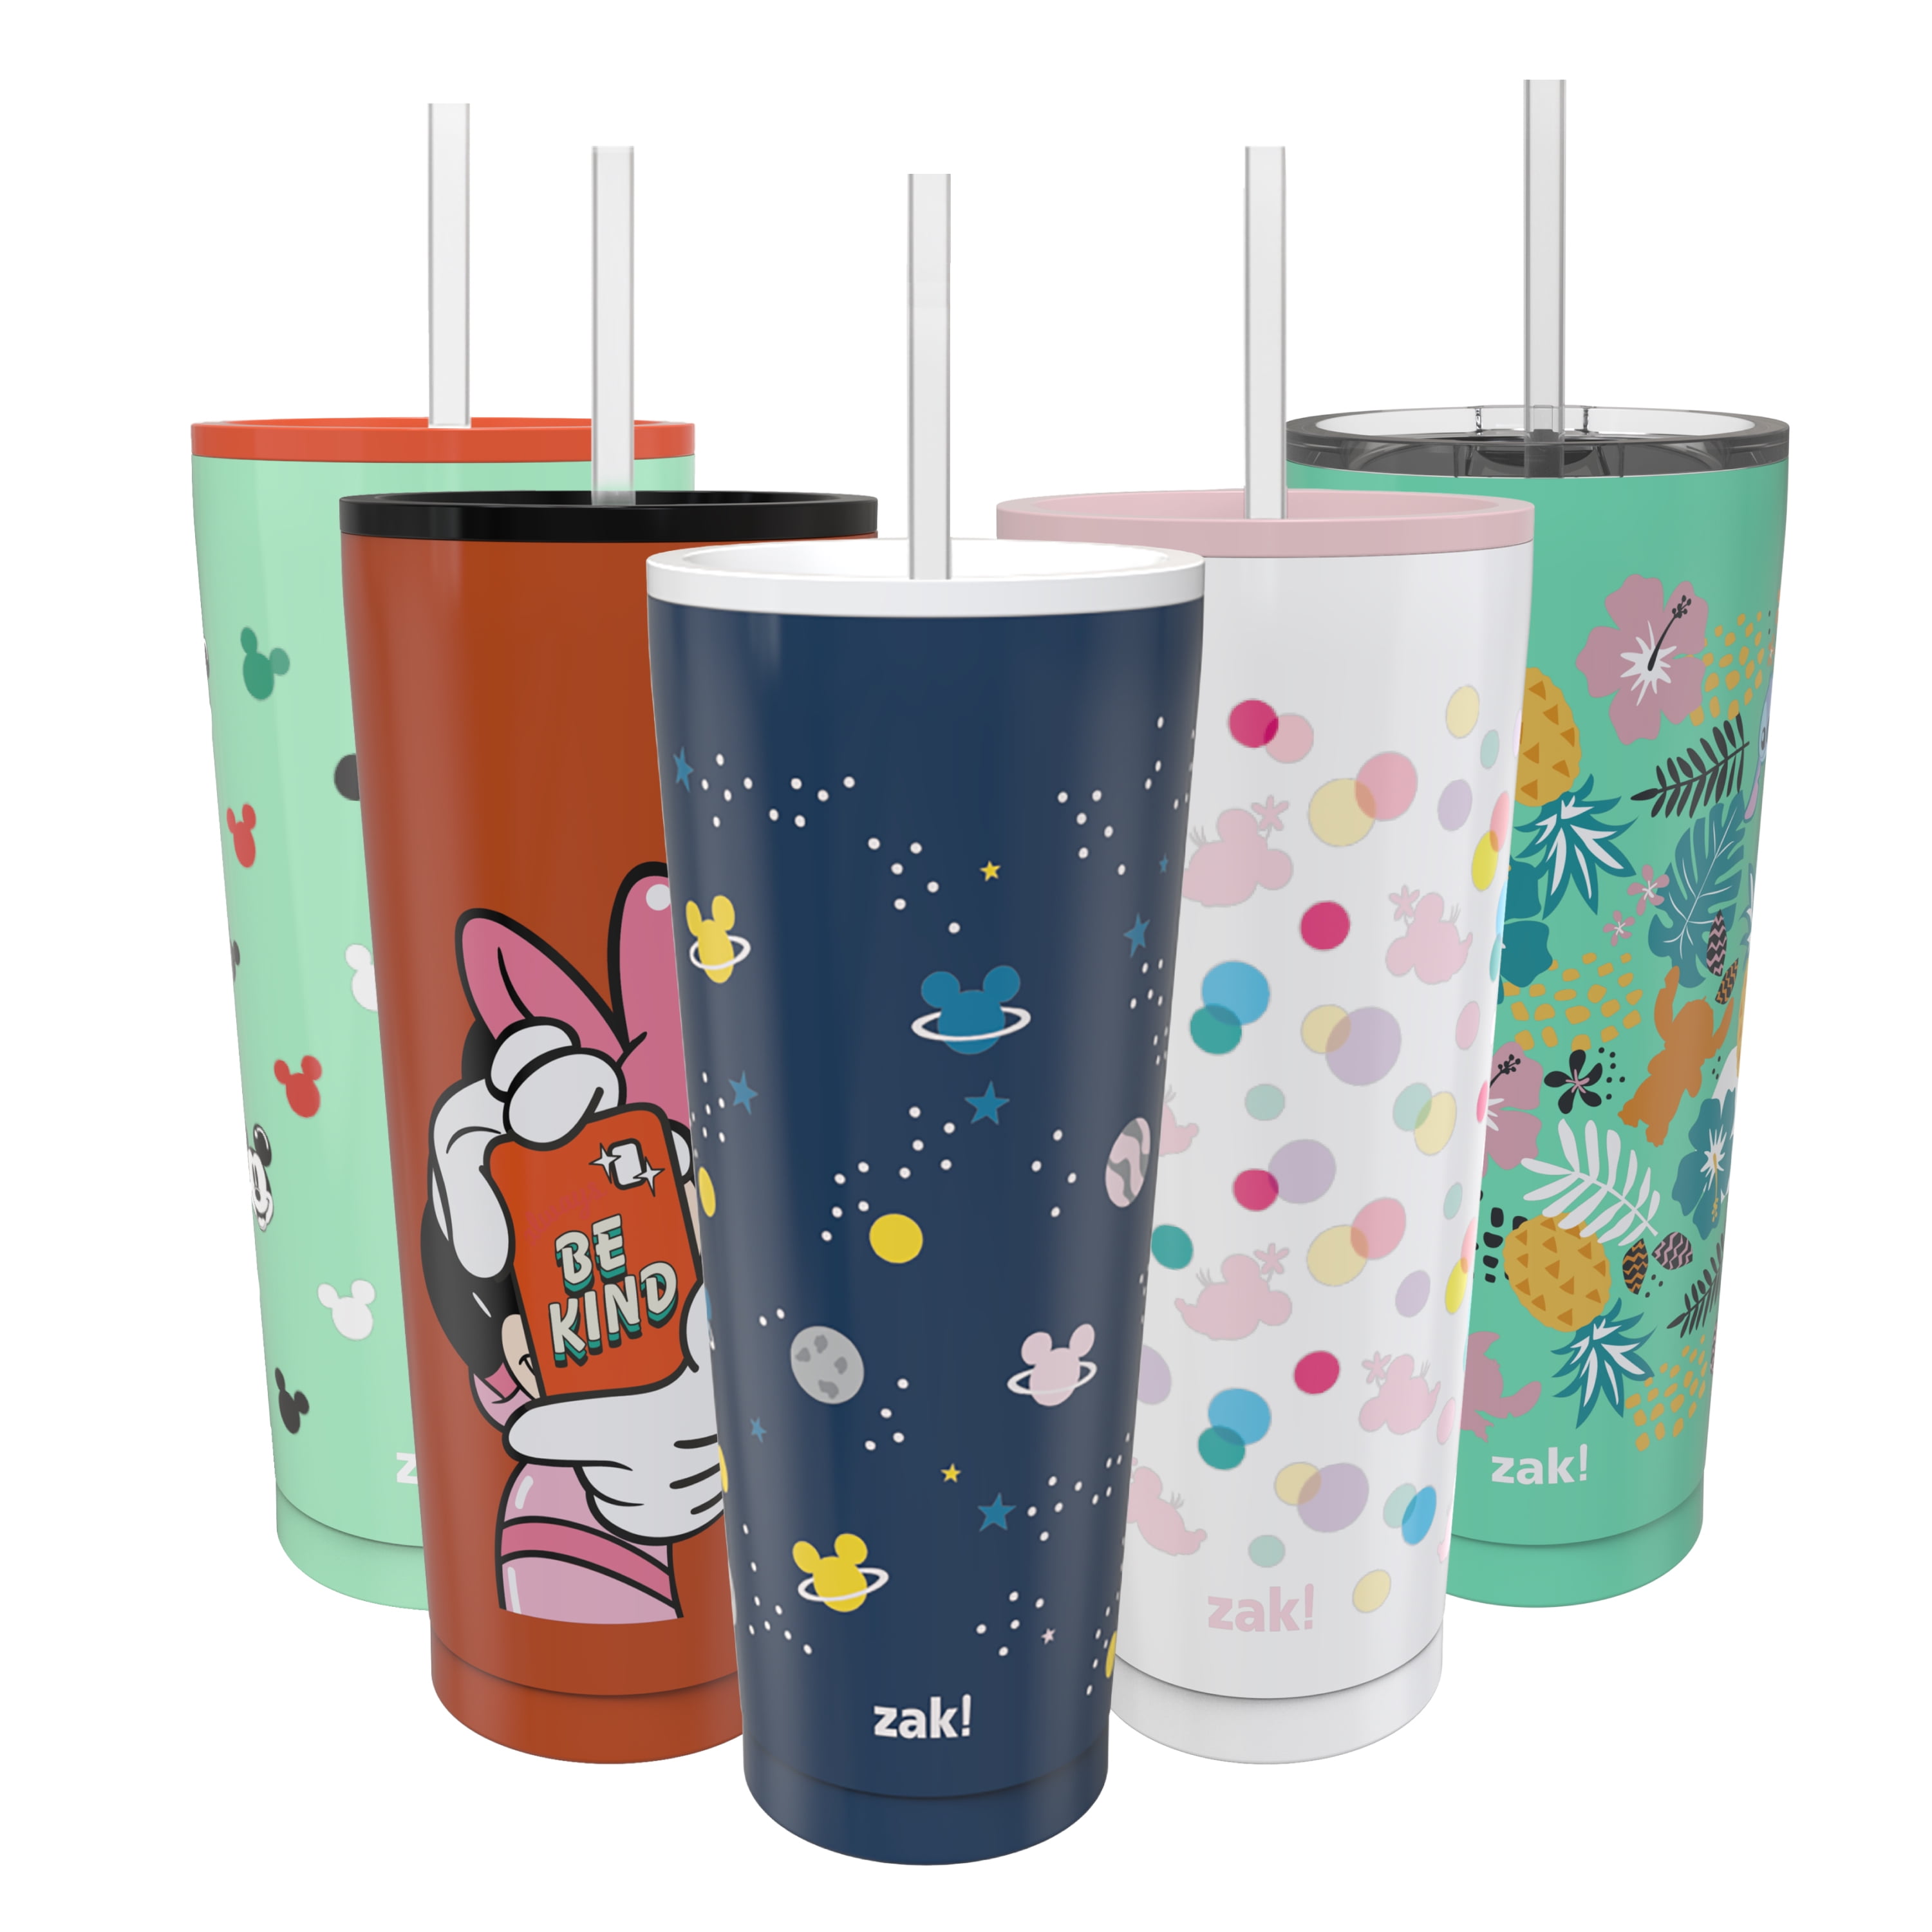 Zak Designs Mainstays Double Wall Insulated Tumbler with Straw